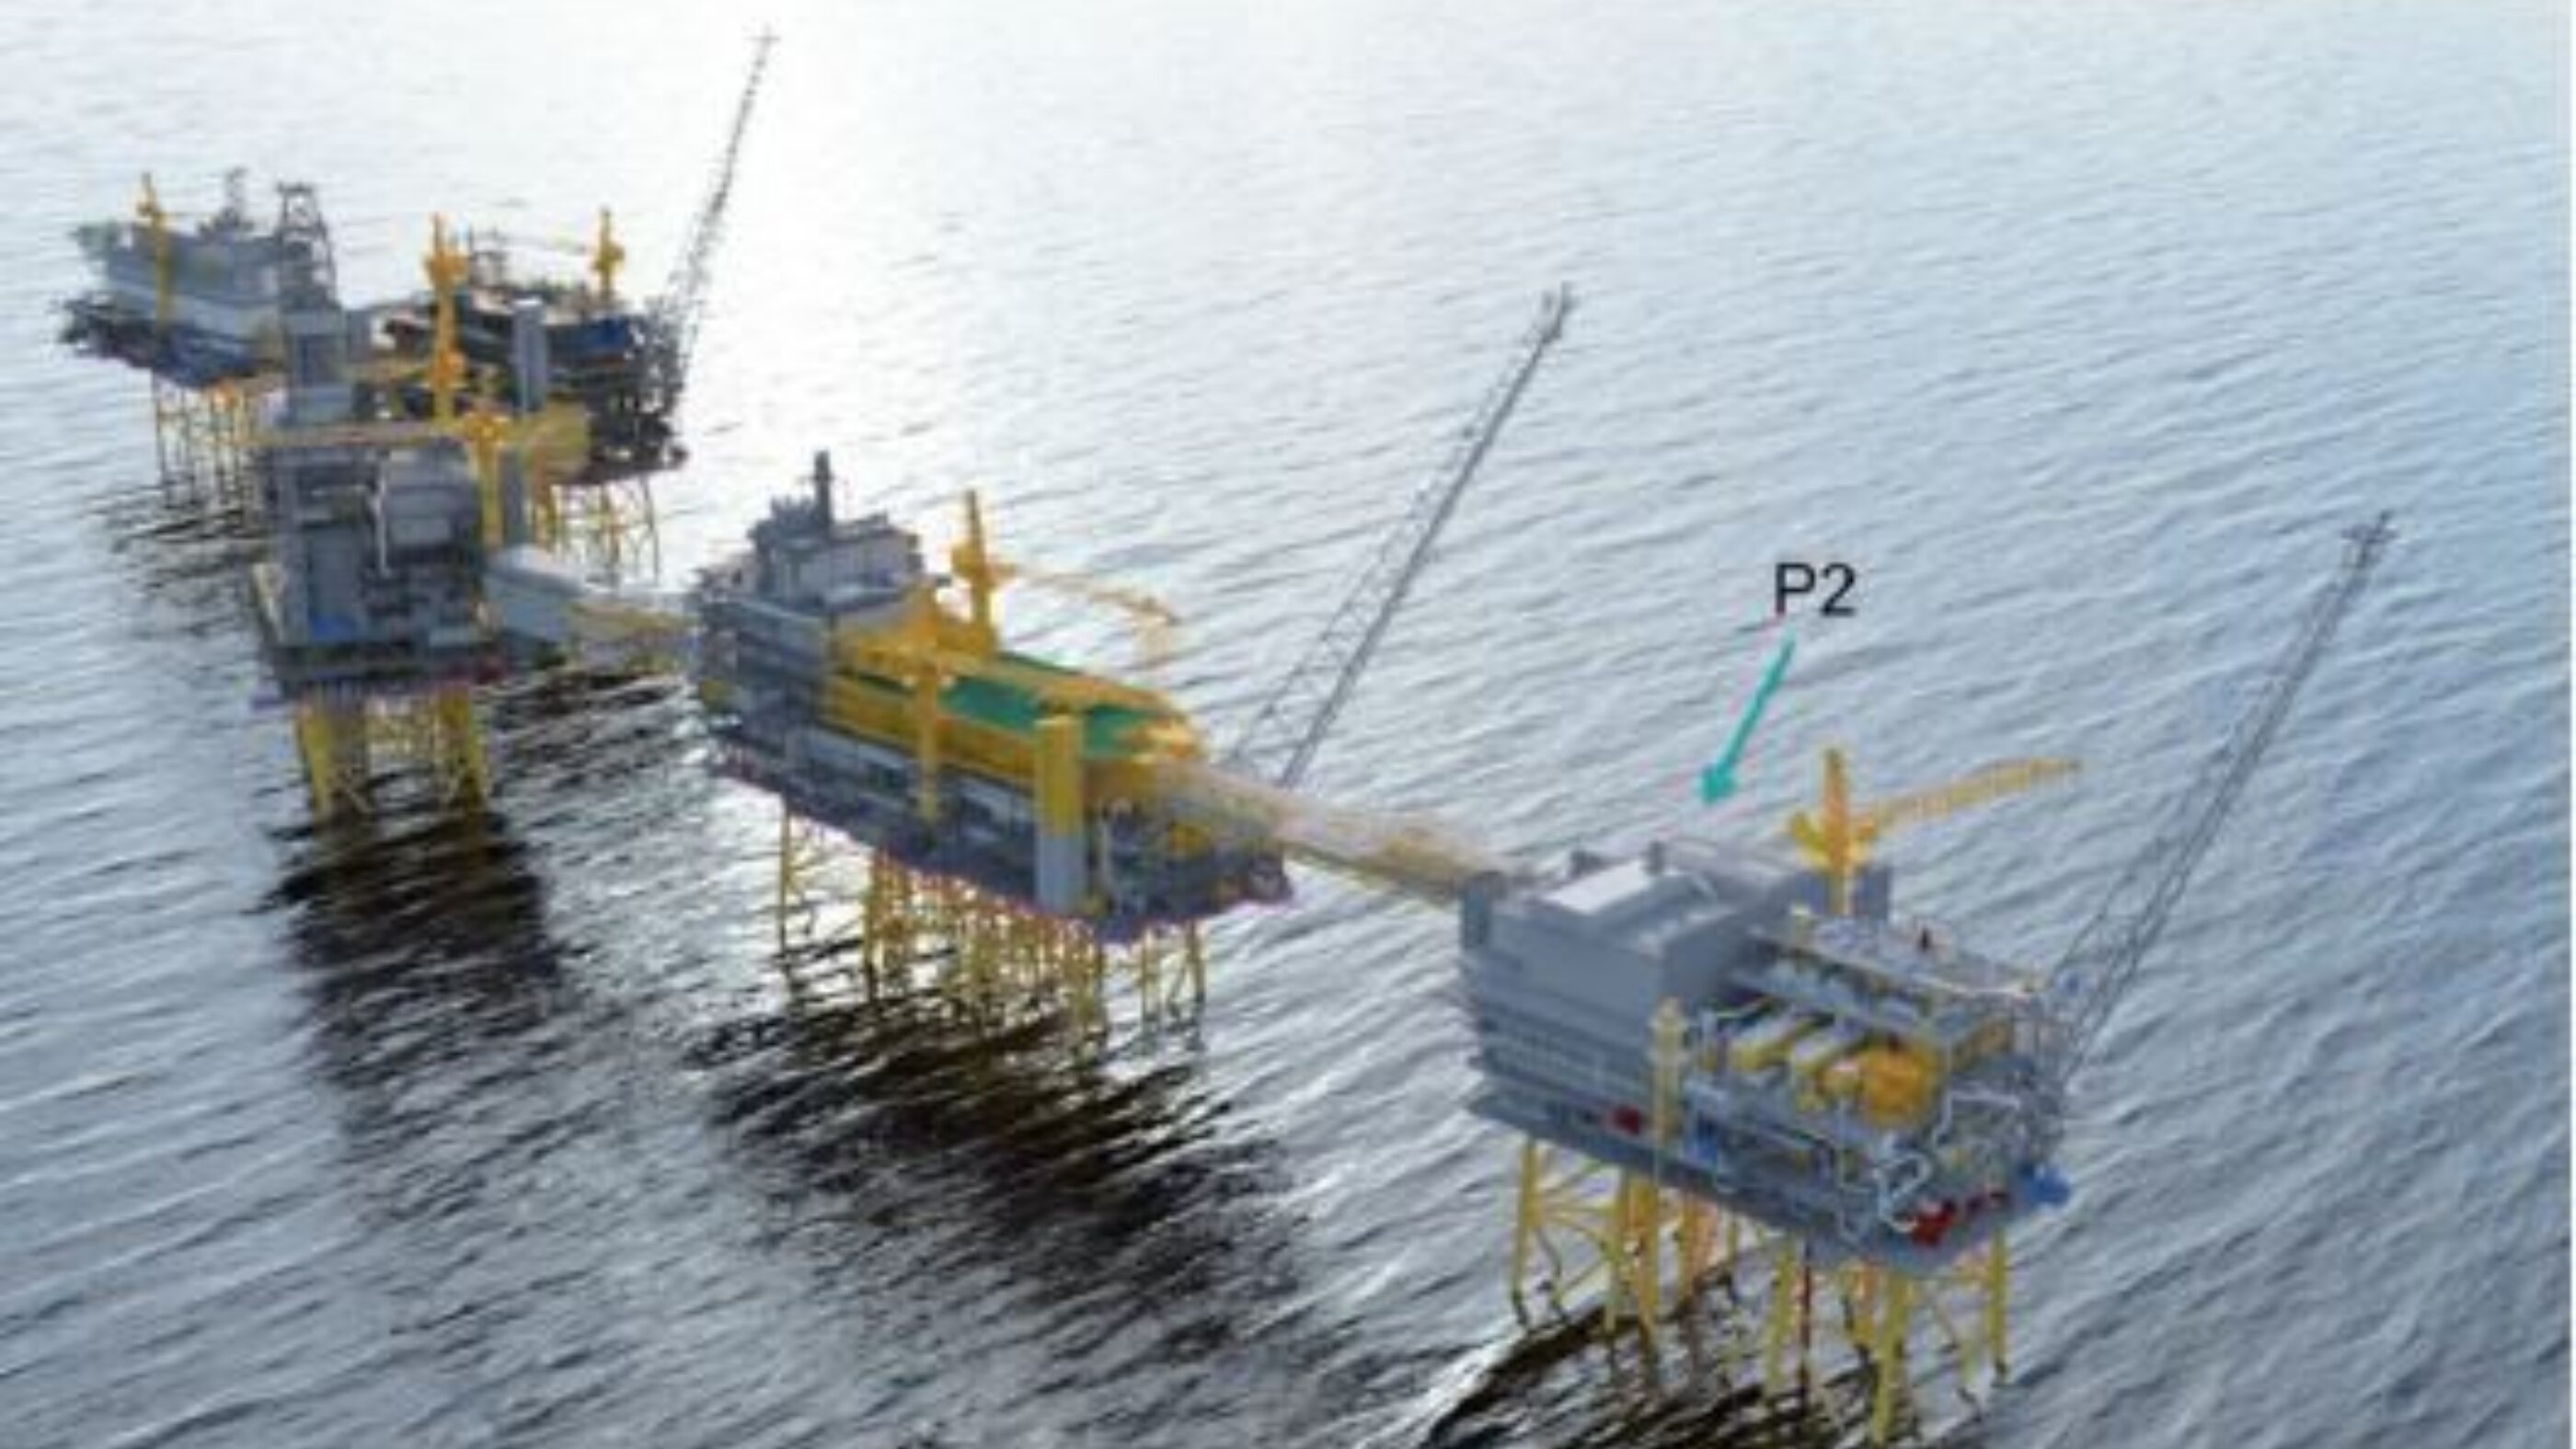 Johan Sverdrup full project sea view incl P2 top view